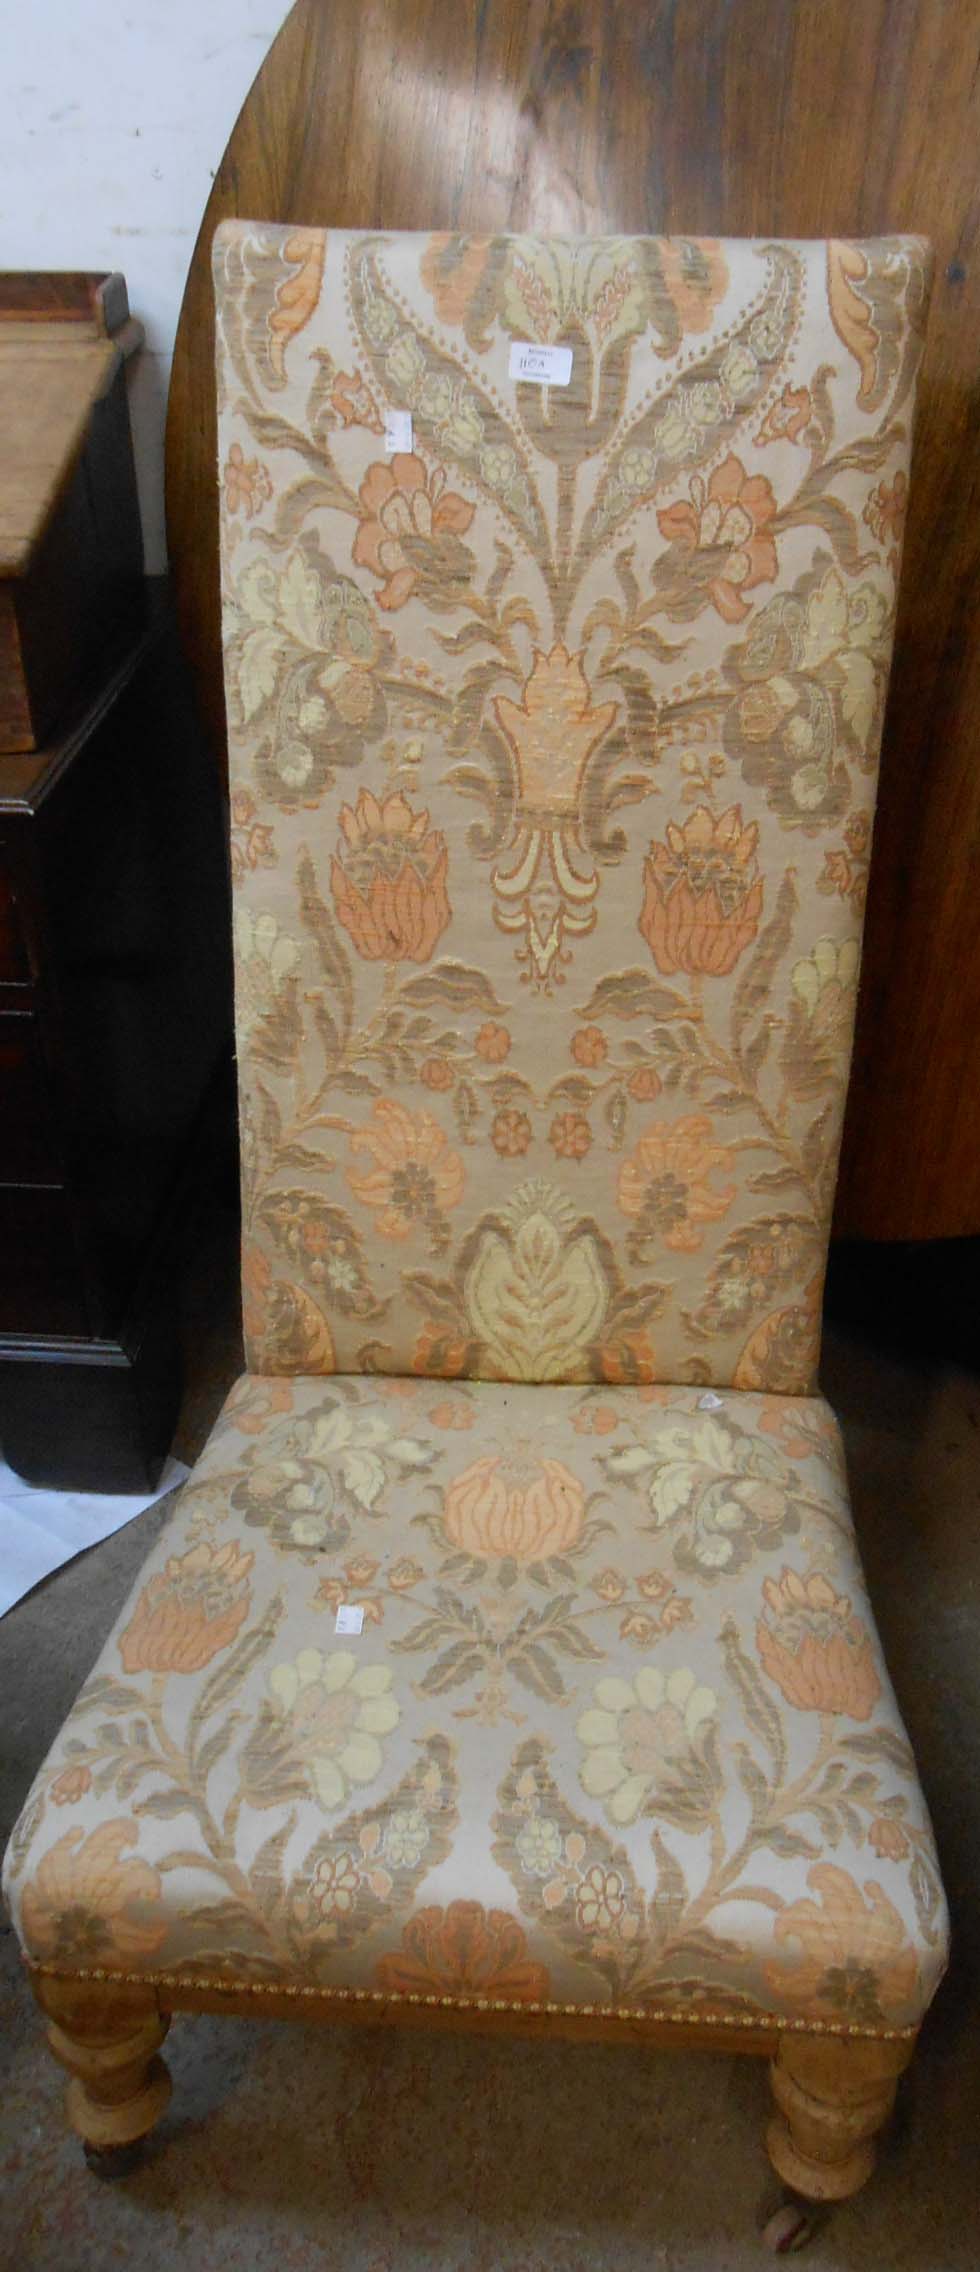 An Edwardian nursing chair with later upholstery